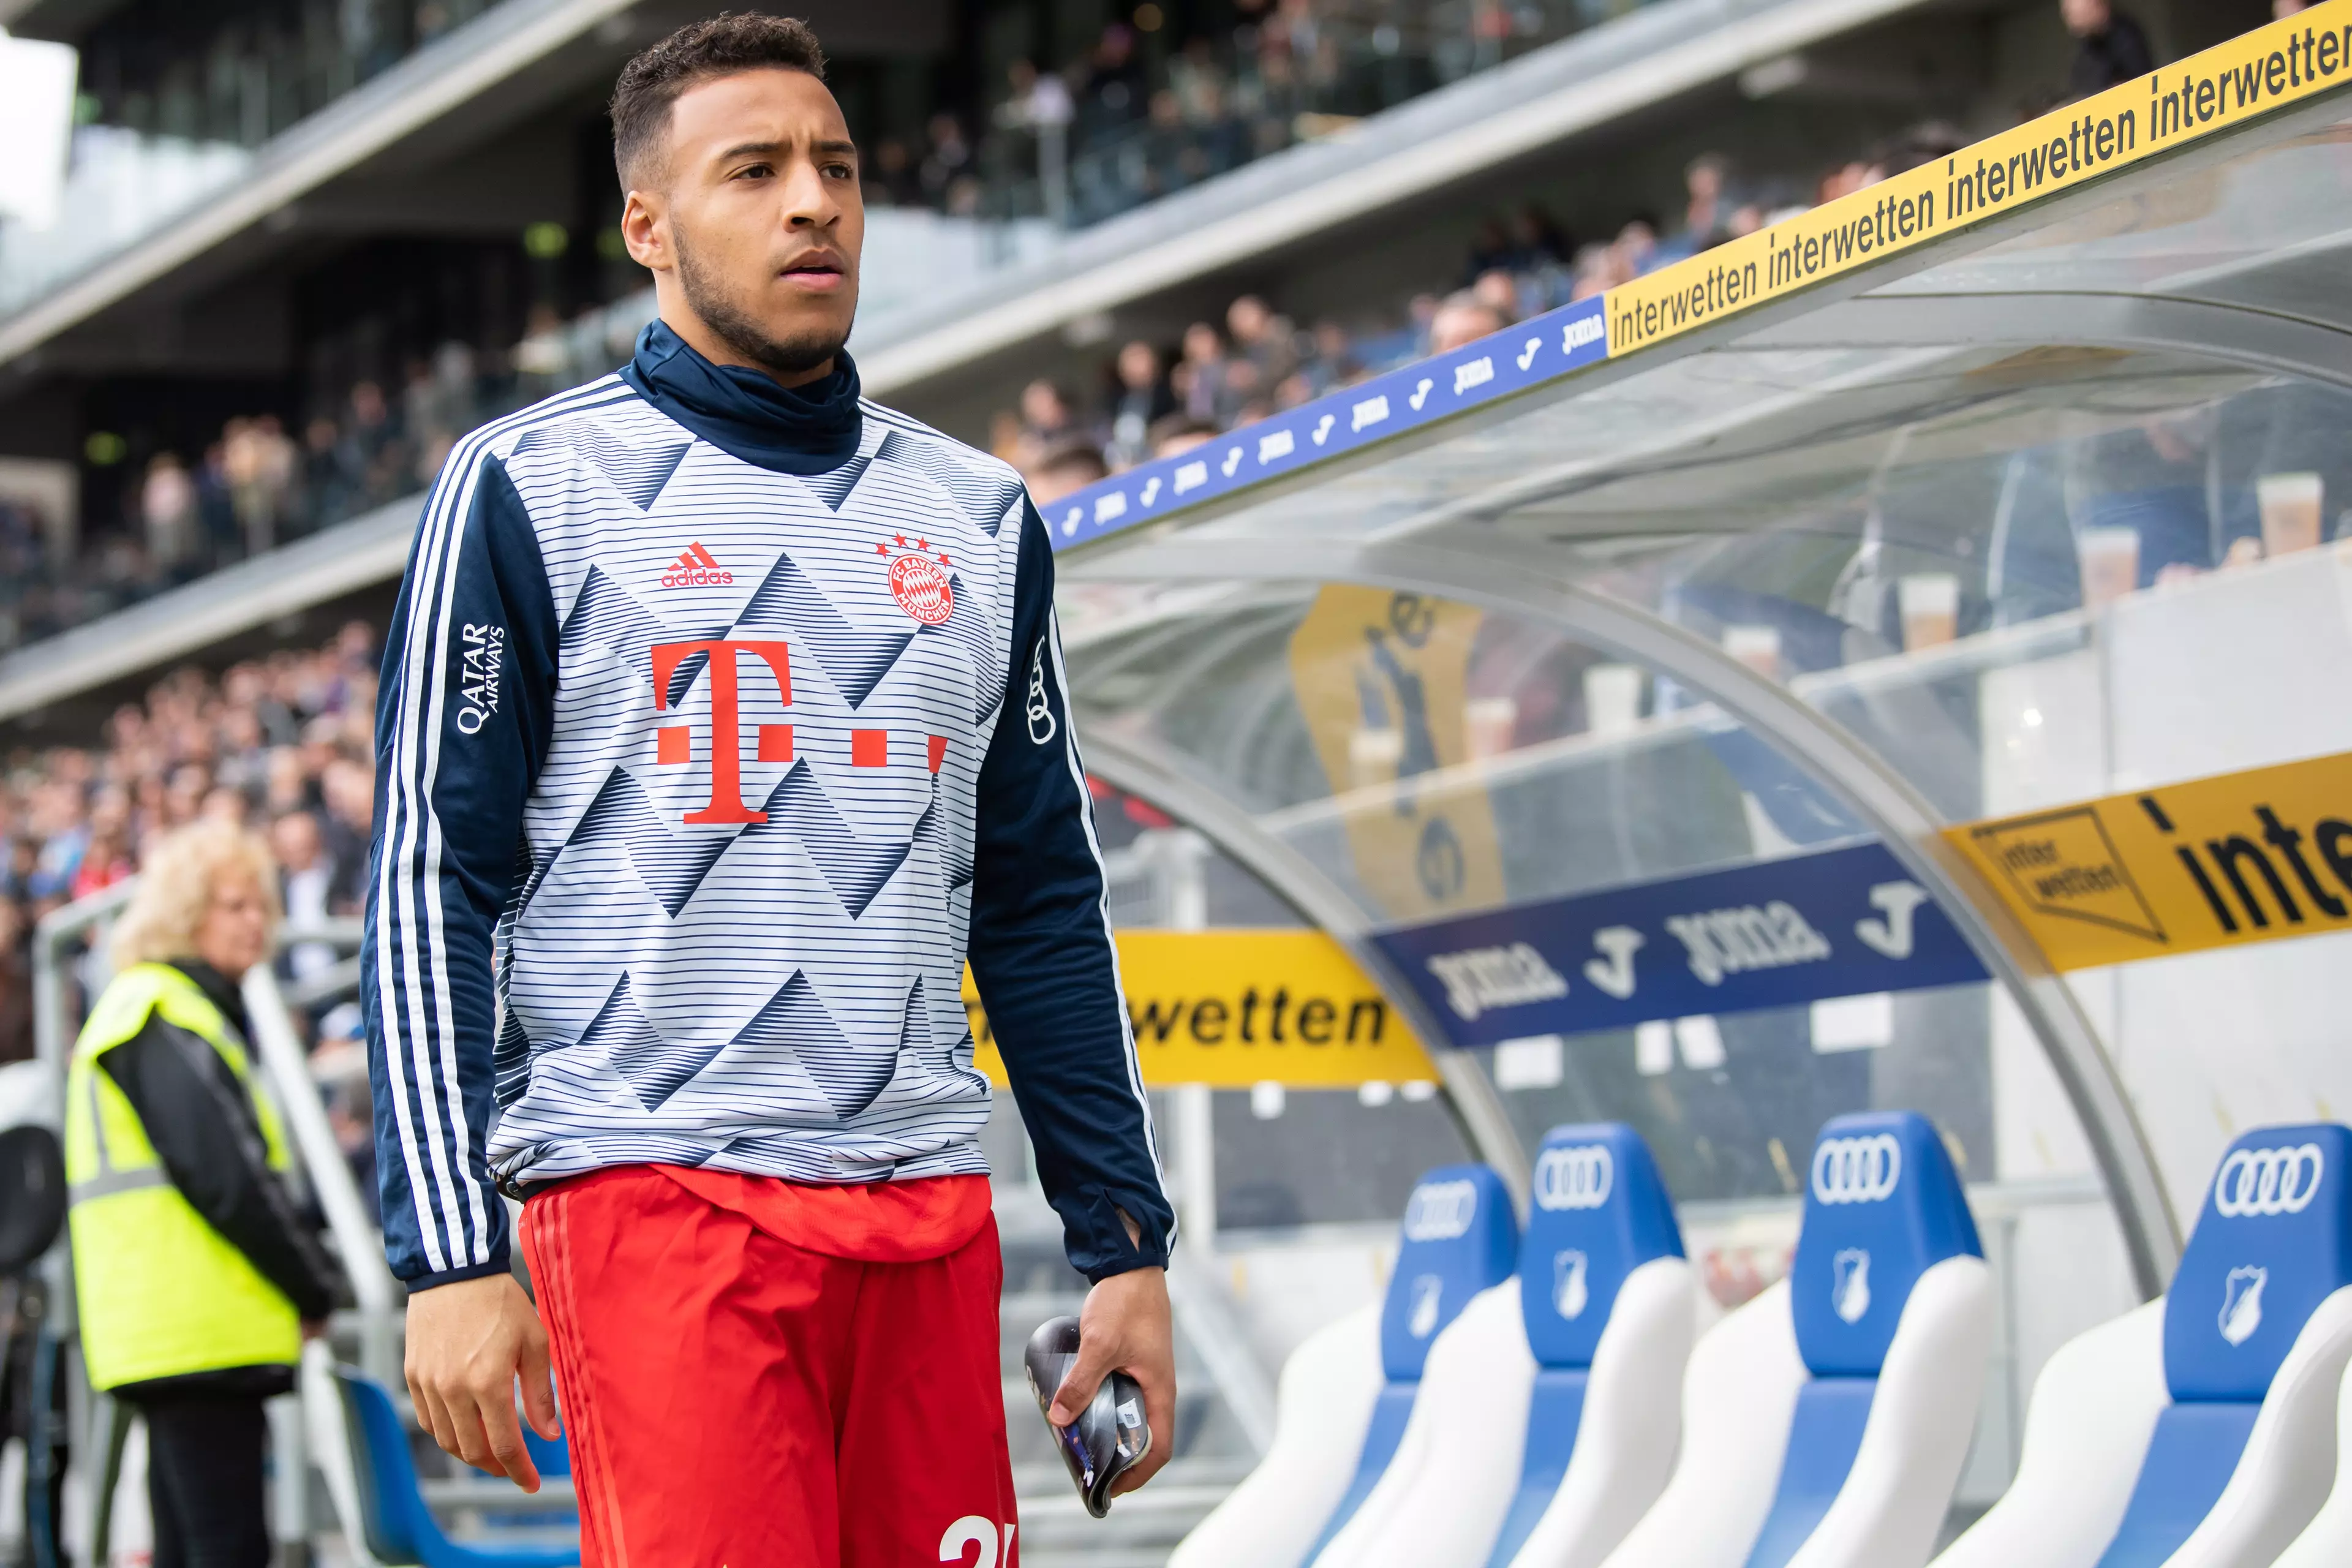 Tolisso is expected to be sold this summer. Image: PA Images